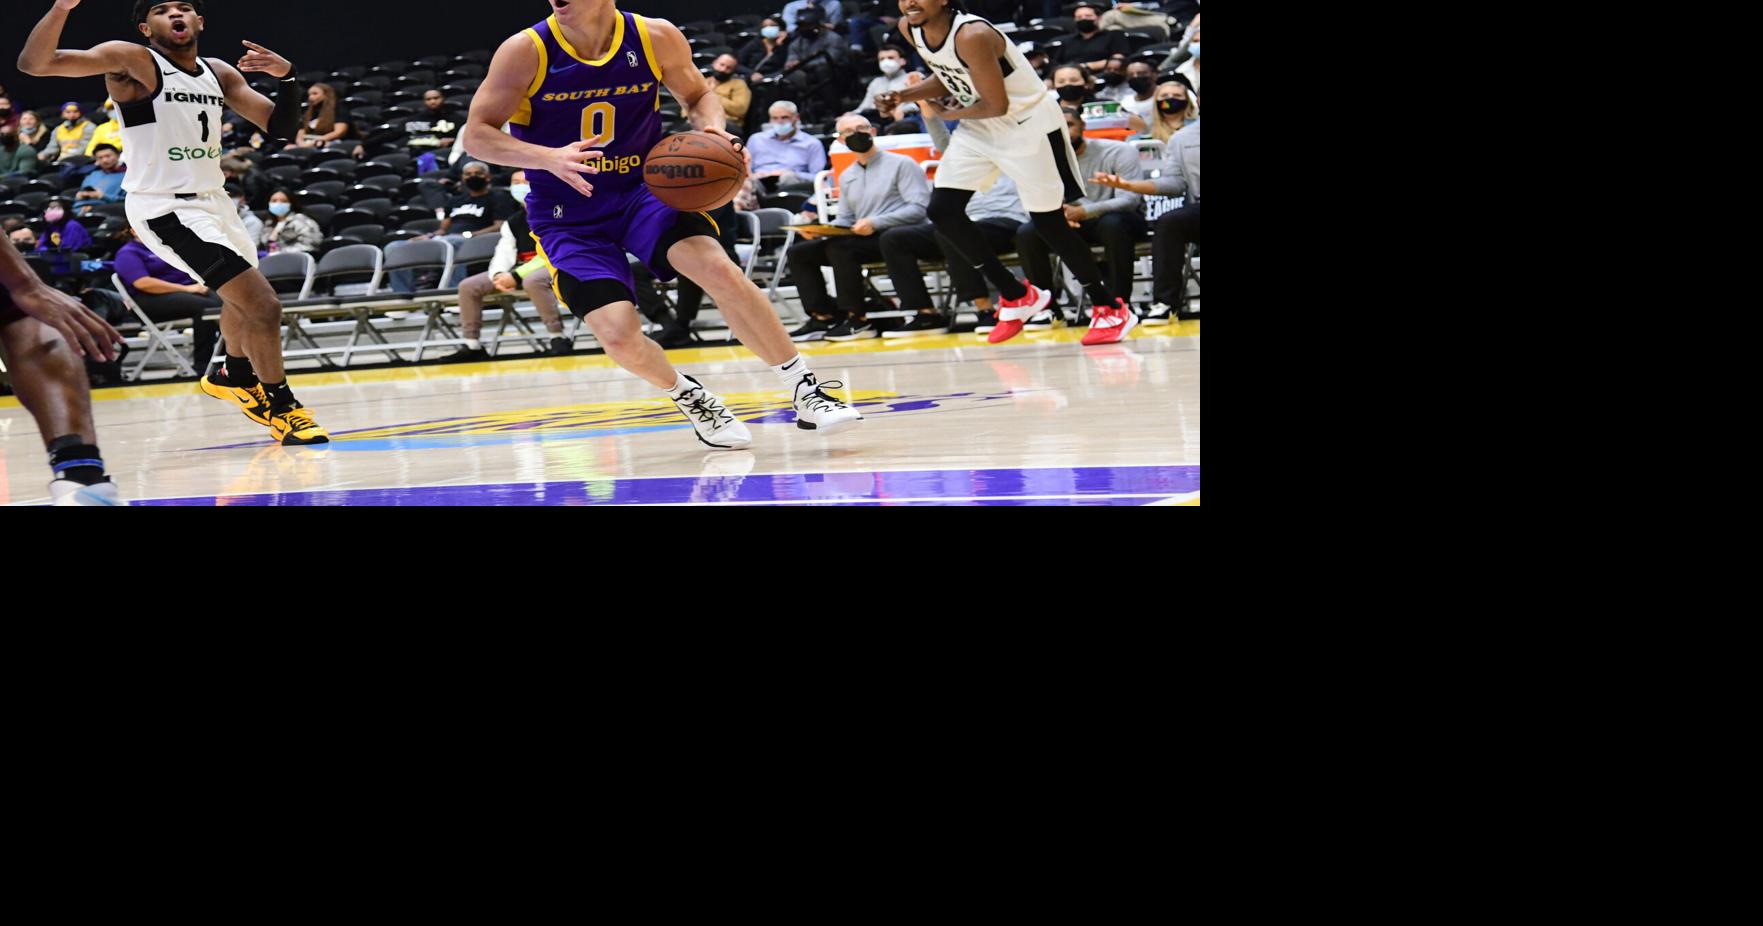 Mac McClung returns to the South Bay Lakers after getting cut by the Bulls, WJHL